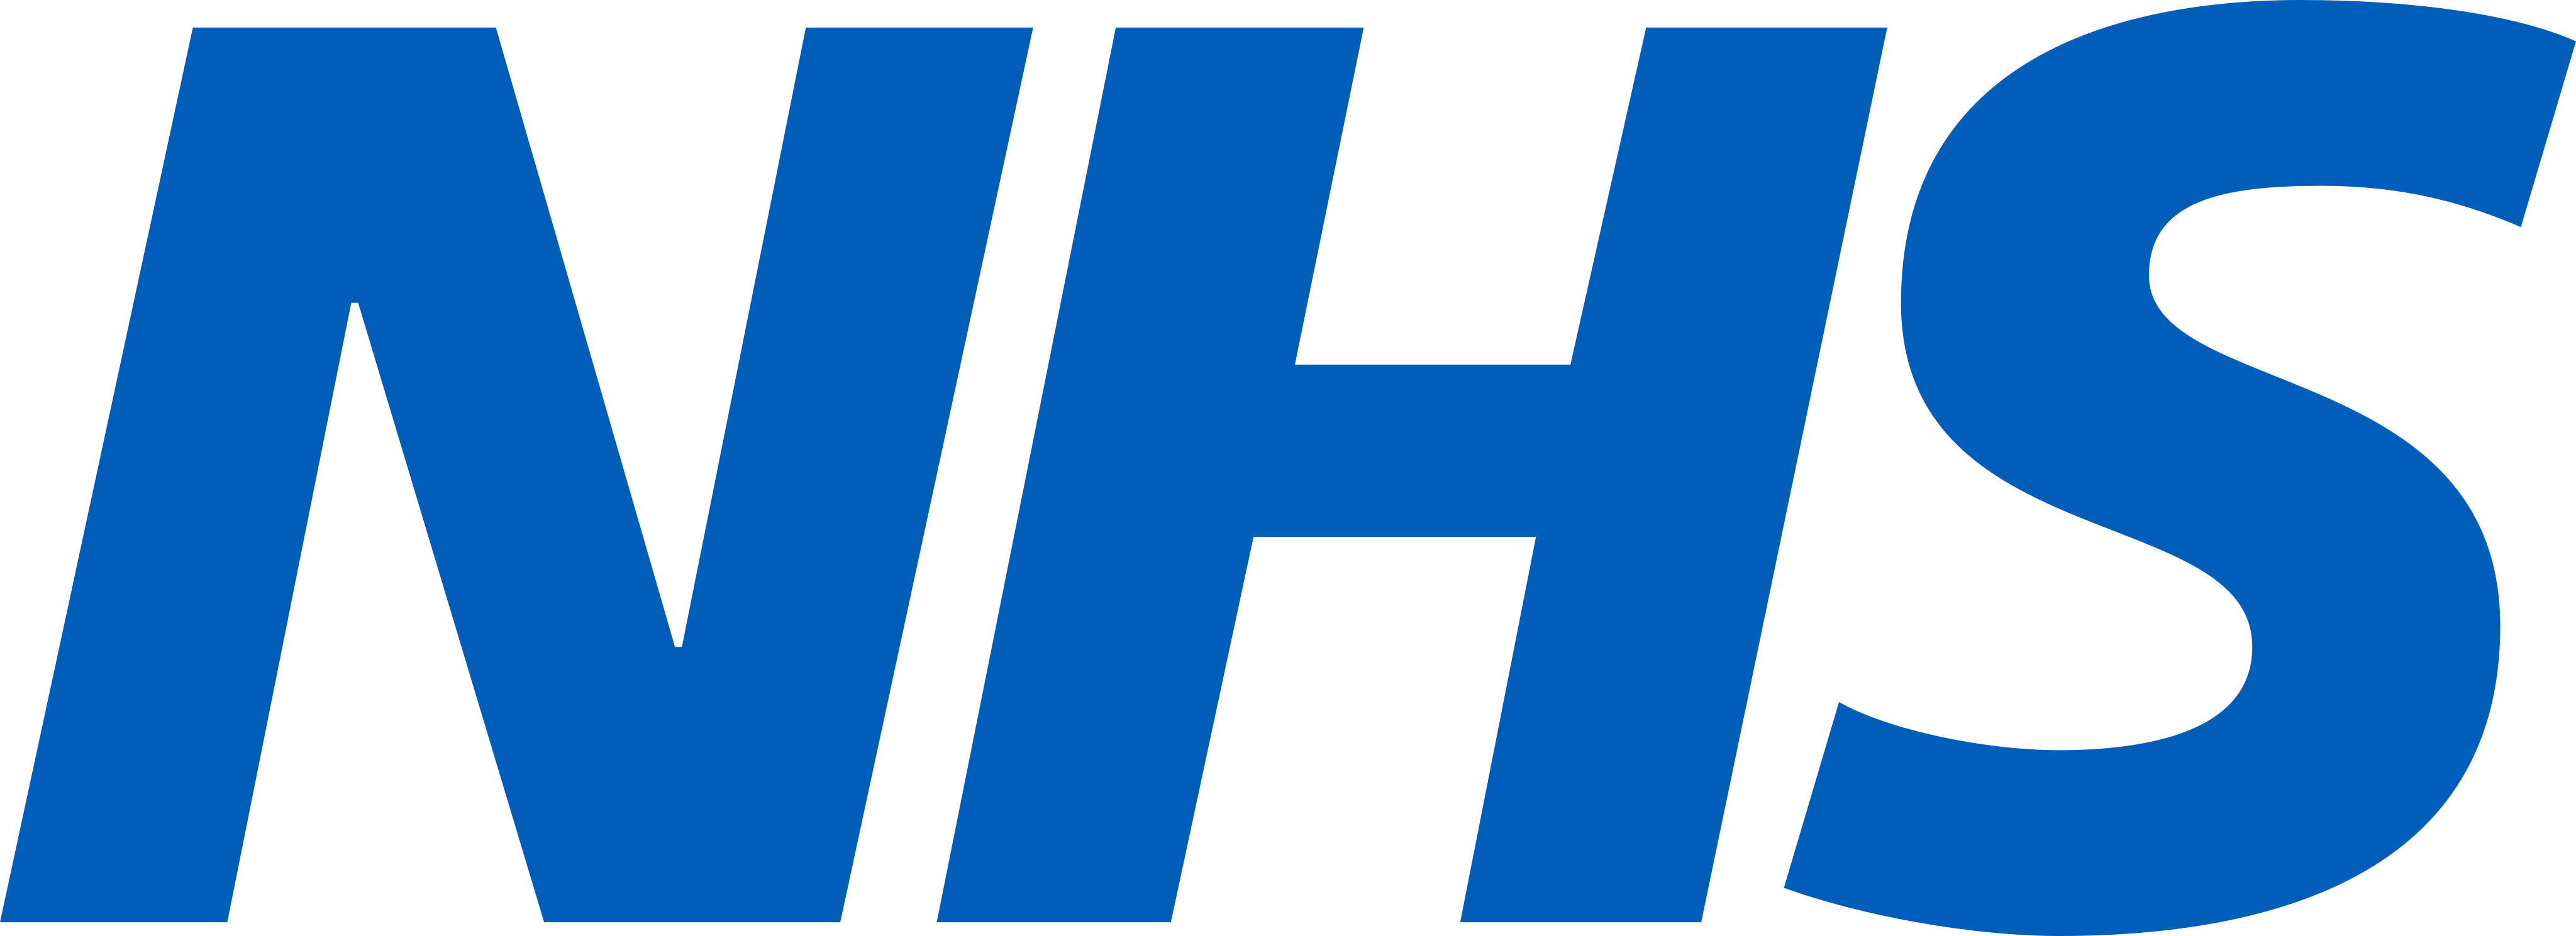 Answering service client - NHS logo